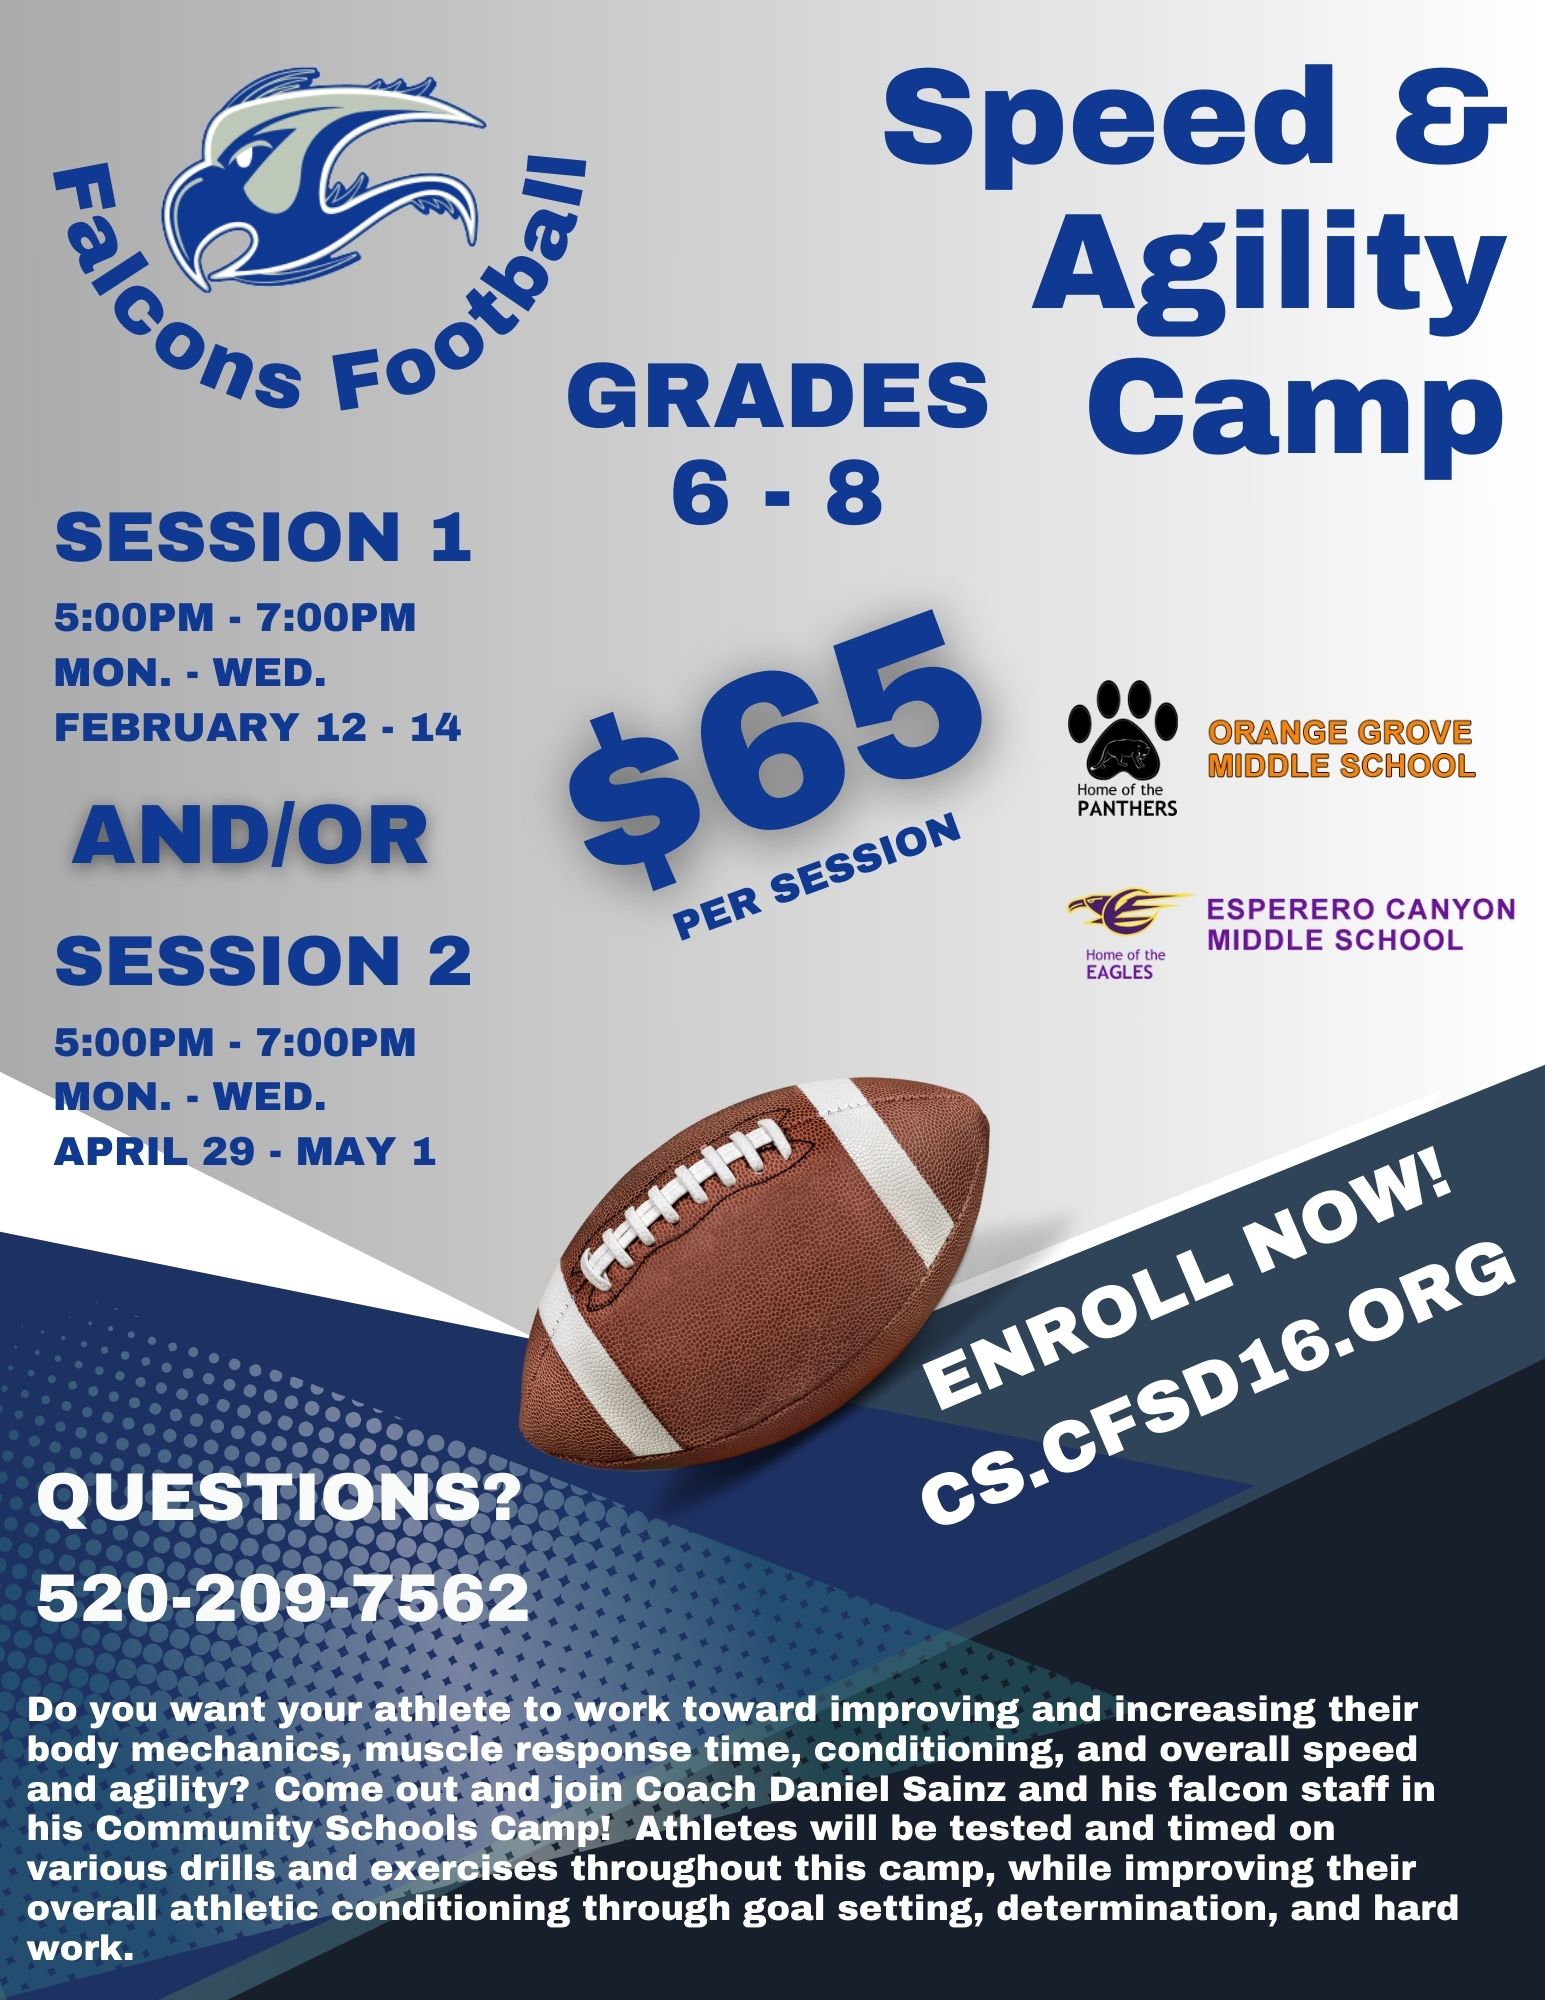 Image: Middle School Football Camp_2023-24 - Do you want your athlete to work toward improving and increasing their body mechanics, muscle response time, conditioning, and overall speed and agility?  Come out and join Coach Daniel Sainz and his falcon staff in his Community Schools Camp!  Athletes will be tested and timed on various drills and exercises throughout this camp, while improving their overall athletic conditioning through goal setting, determination, and hard work. Grades 6 - 8, Session 1 - 5:00pm - 7:00pm Mon. - Wed. February 12 - 14, Session 2 - 5:00pm - 7:00pm Mon. - Wed. April 29 - May 1, Enroll at cs.cfsd16.org, questions? Call 520-209-7562